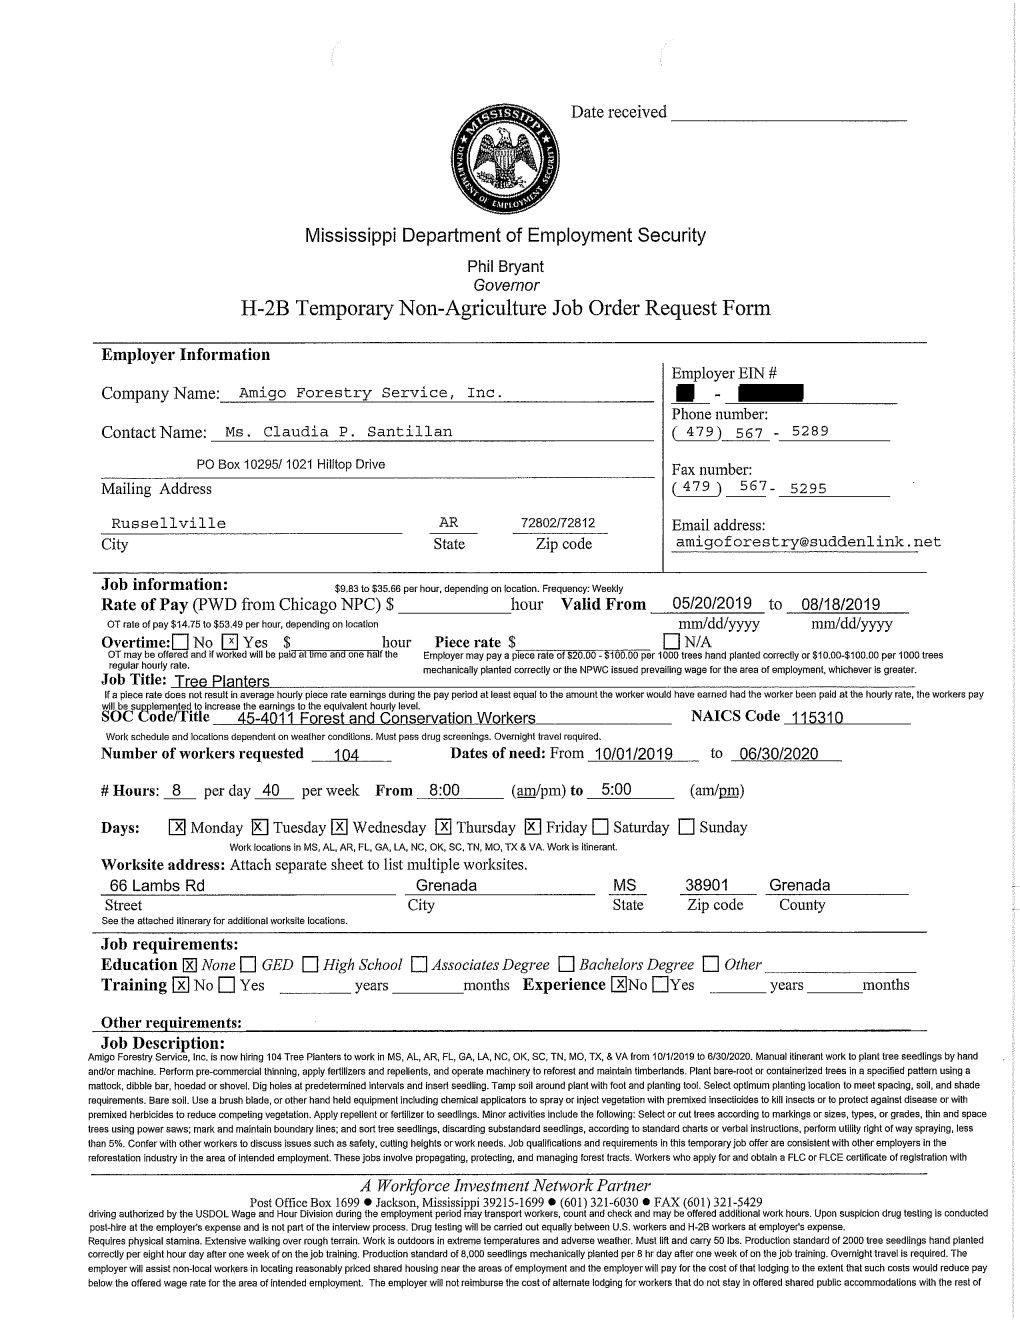 H-2B Temporary Non-Agriculture Job Order Request Form